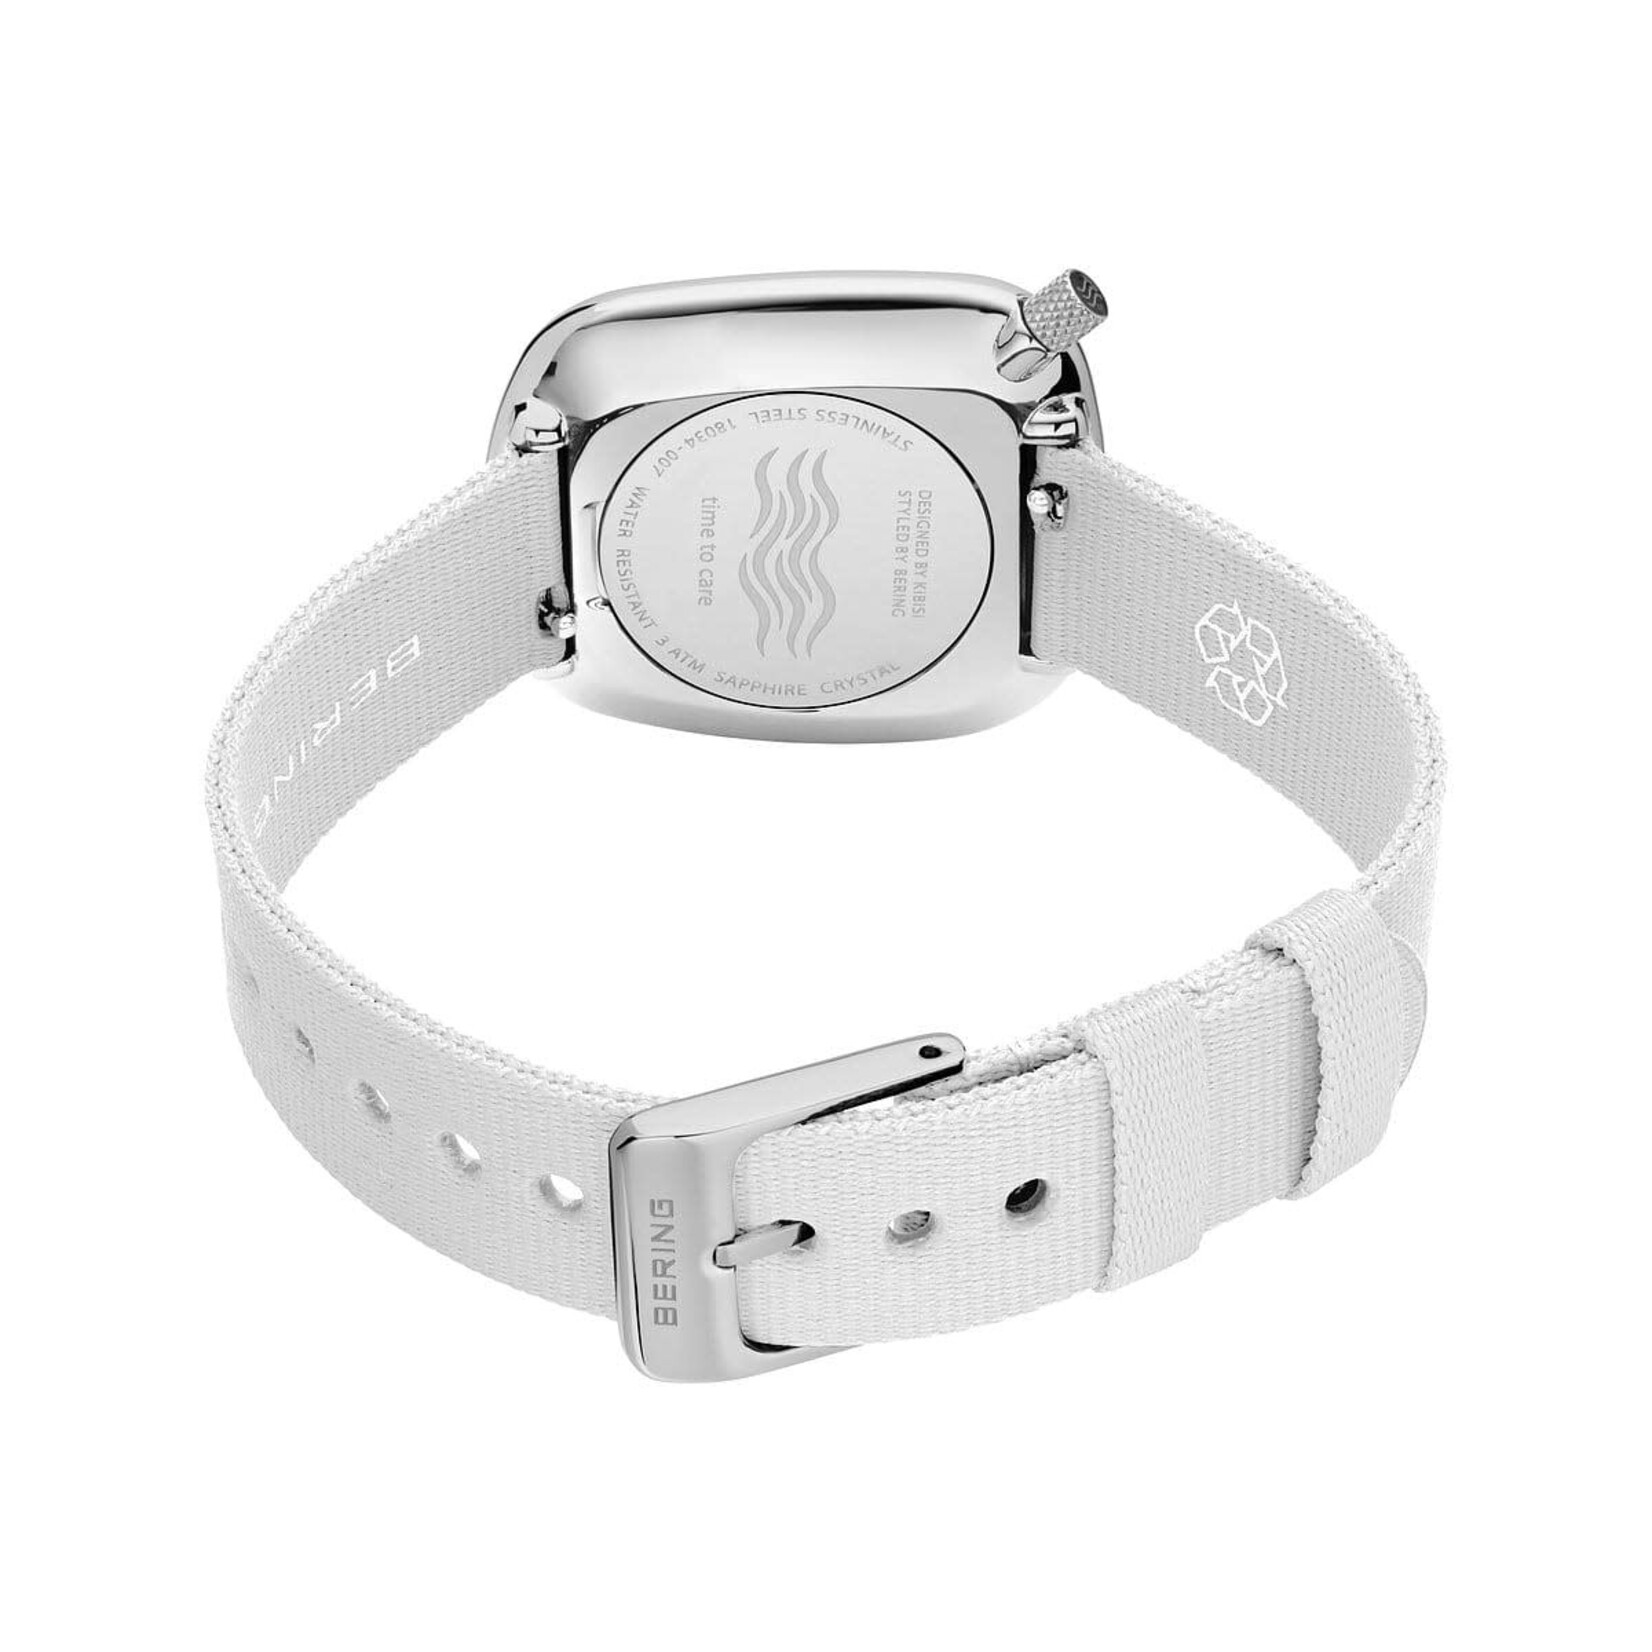 Bering White Pebble Recycled Strap Watch